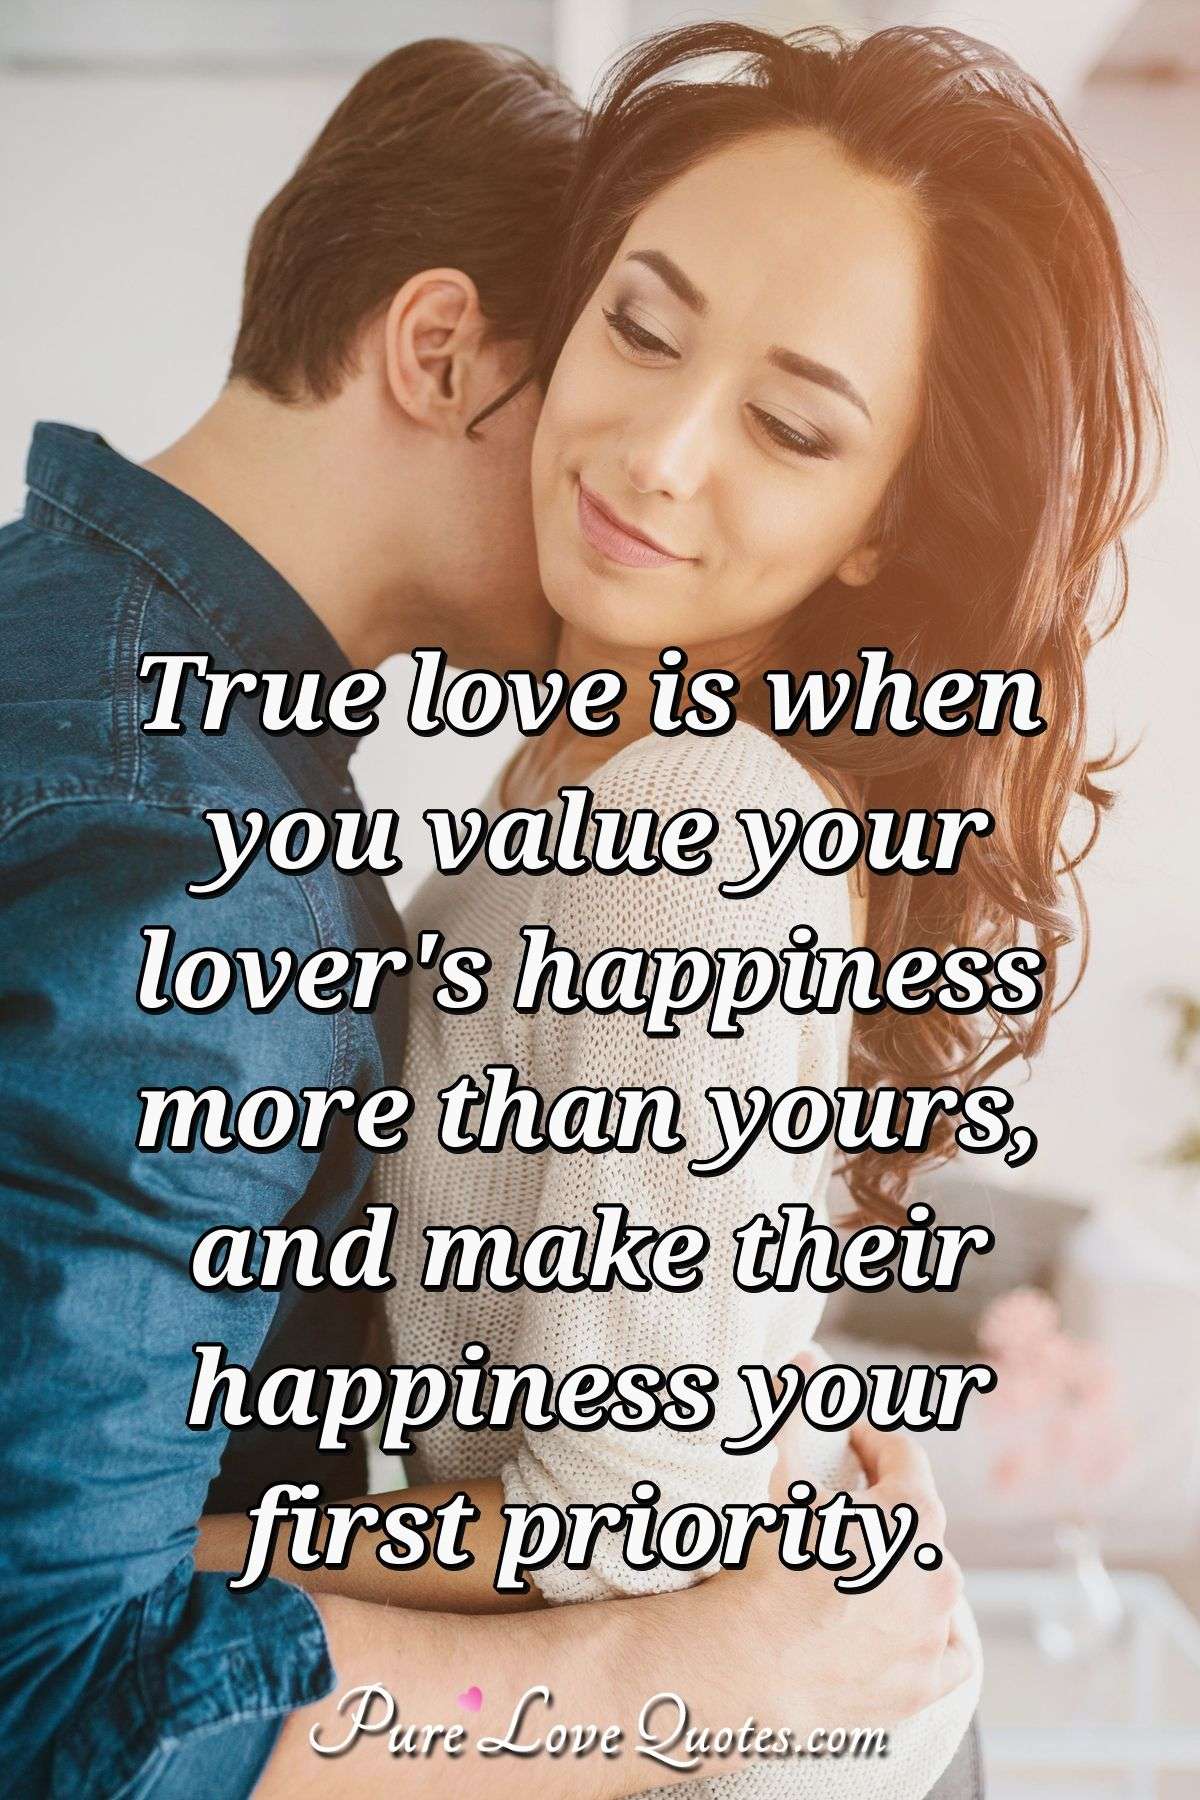 True love is when you value your lover's happiness more than yours, and ...